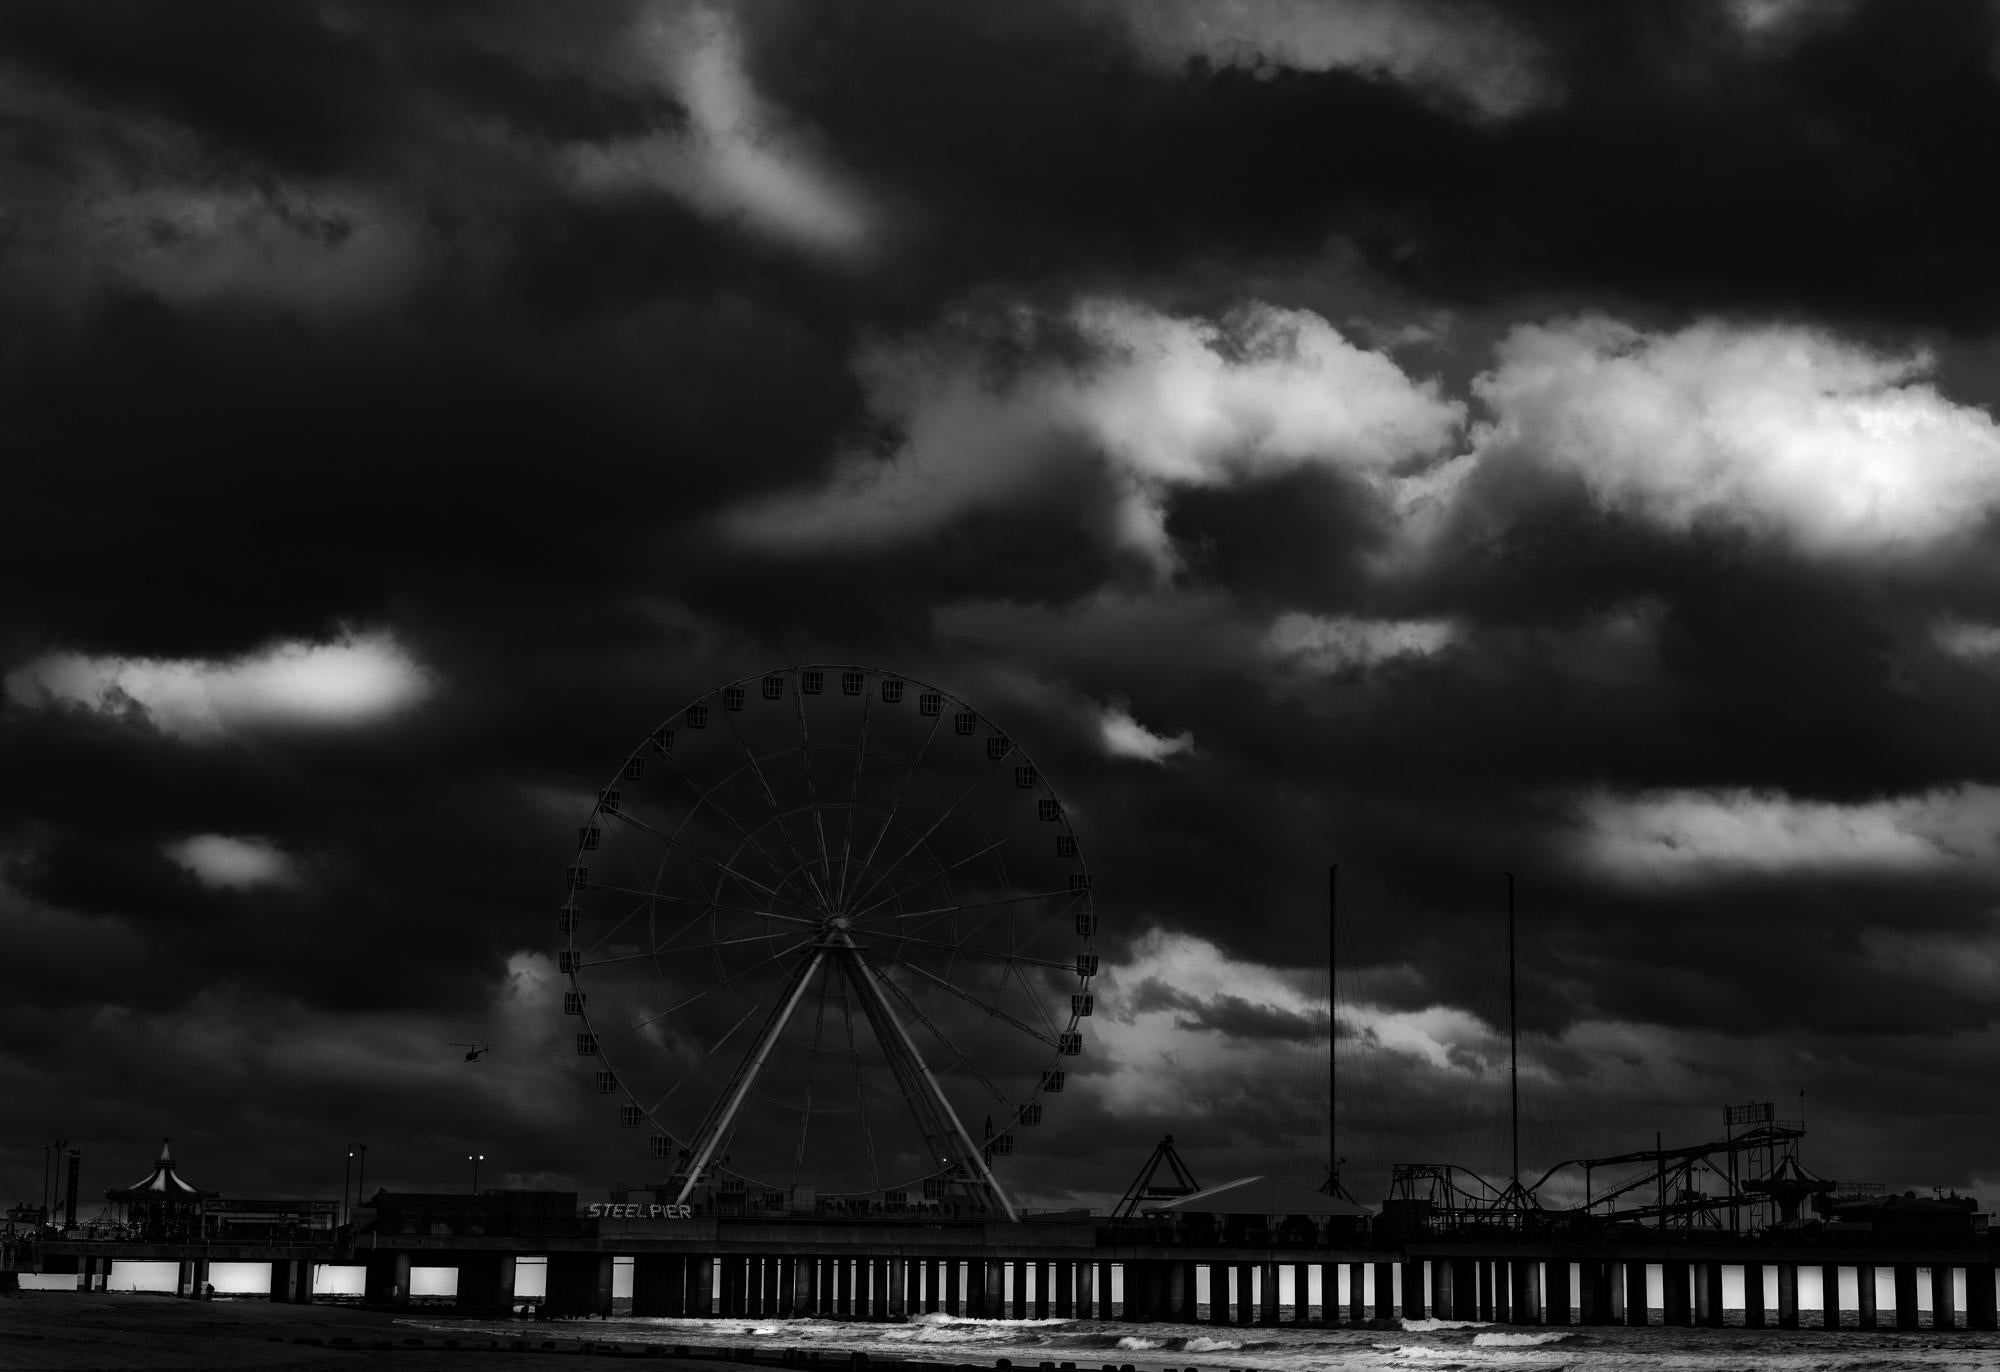  Limited Edition Black and White Photograph, Atlantic City Steel Pier 

This is the famous steel pier in Atlantic City past it's glory days but still well used. Photograph taken as a gloomy cold October night falls on the Ferris wheel barely visible